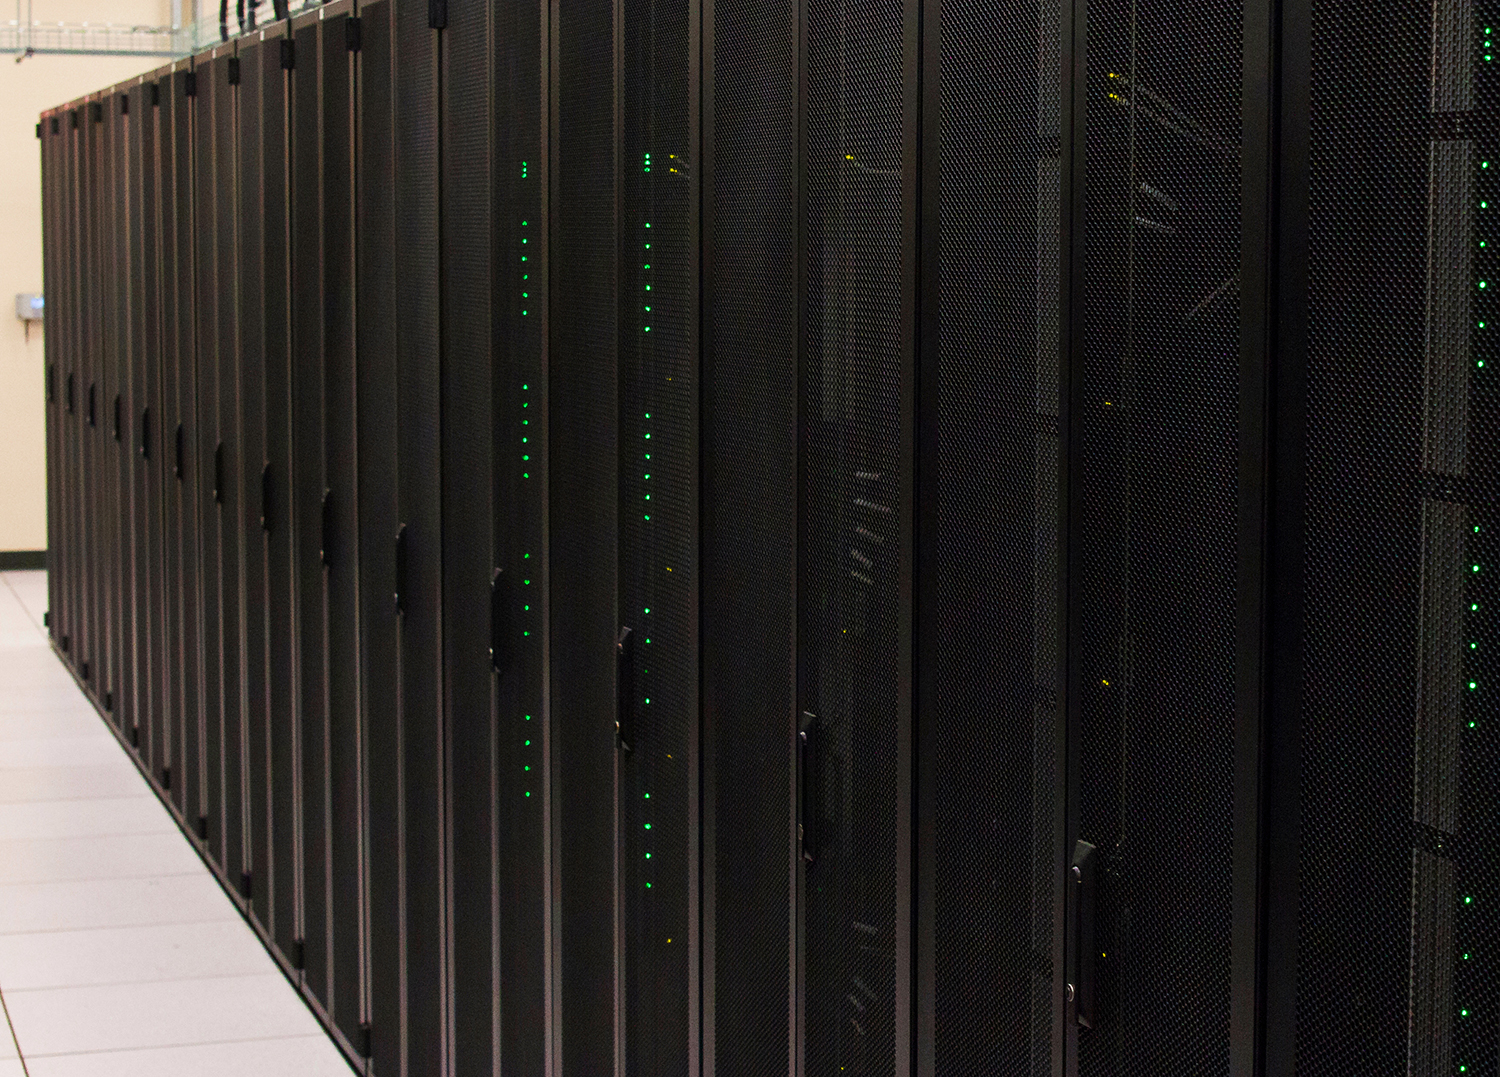 UAlbany Data Center servers in a row.